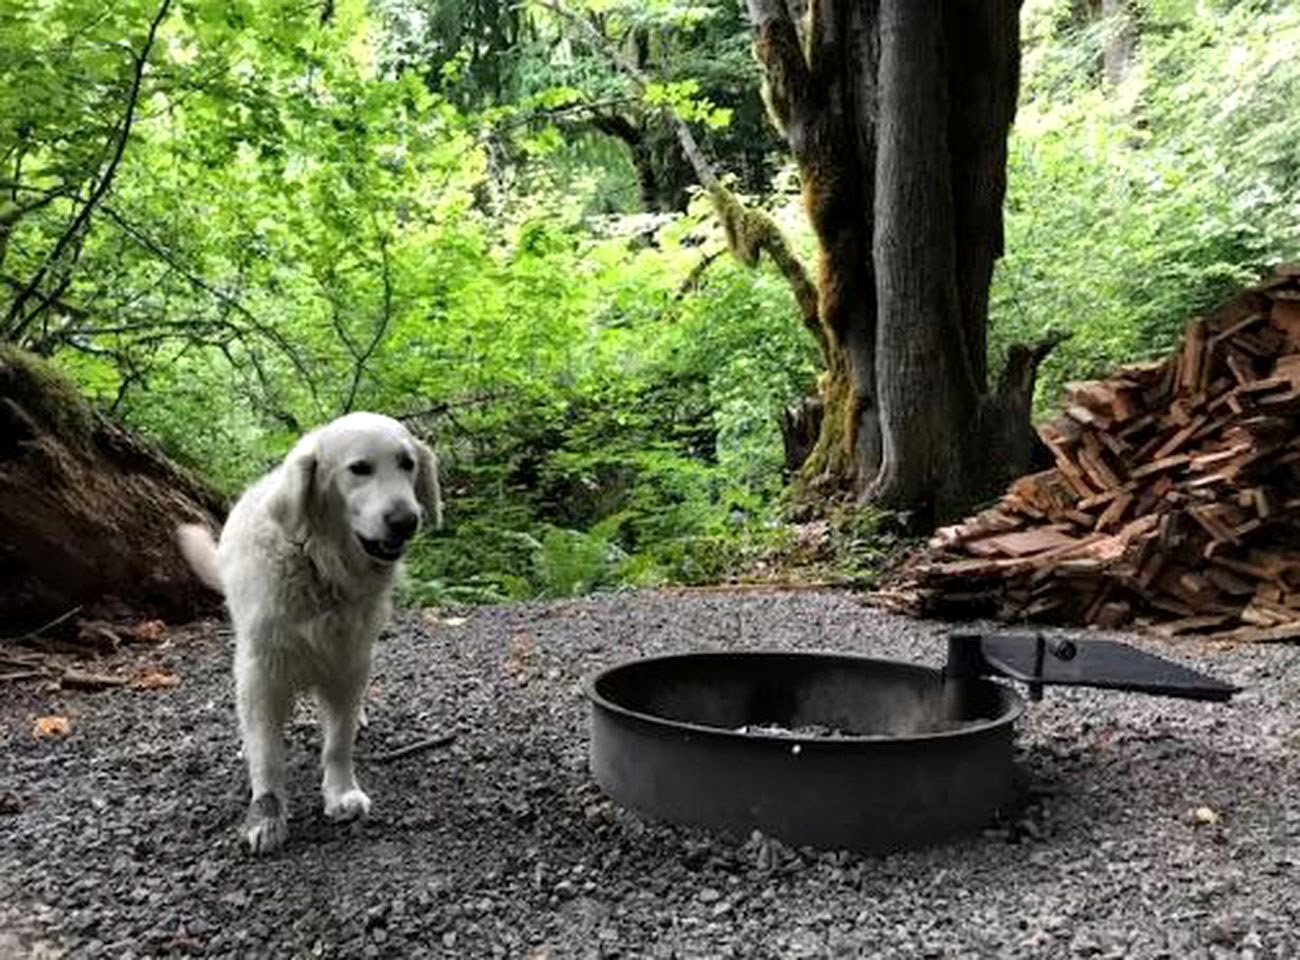 A white dog stands next to the metal outdoor fire pit